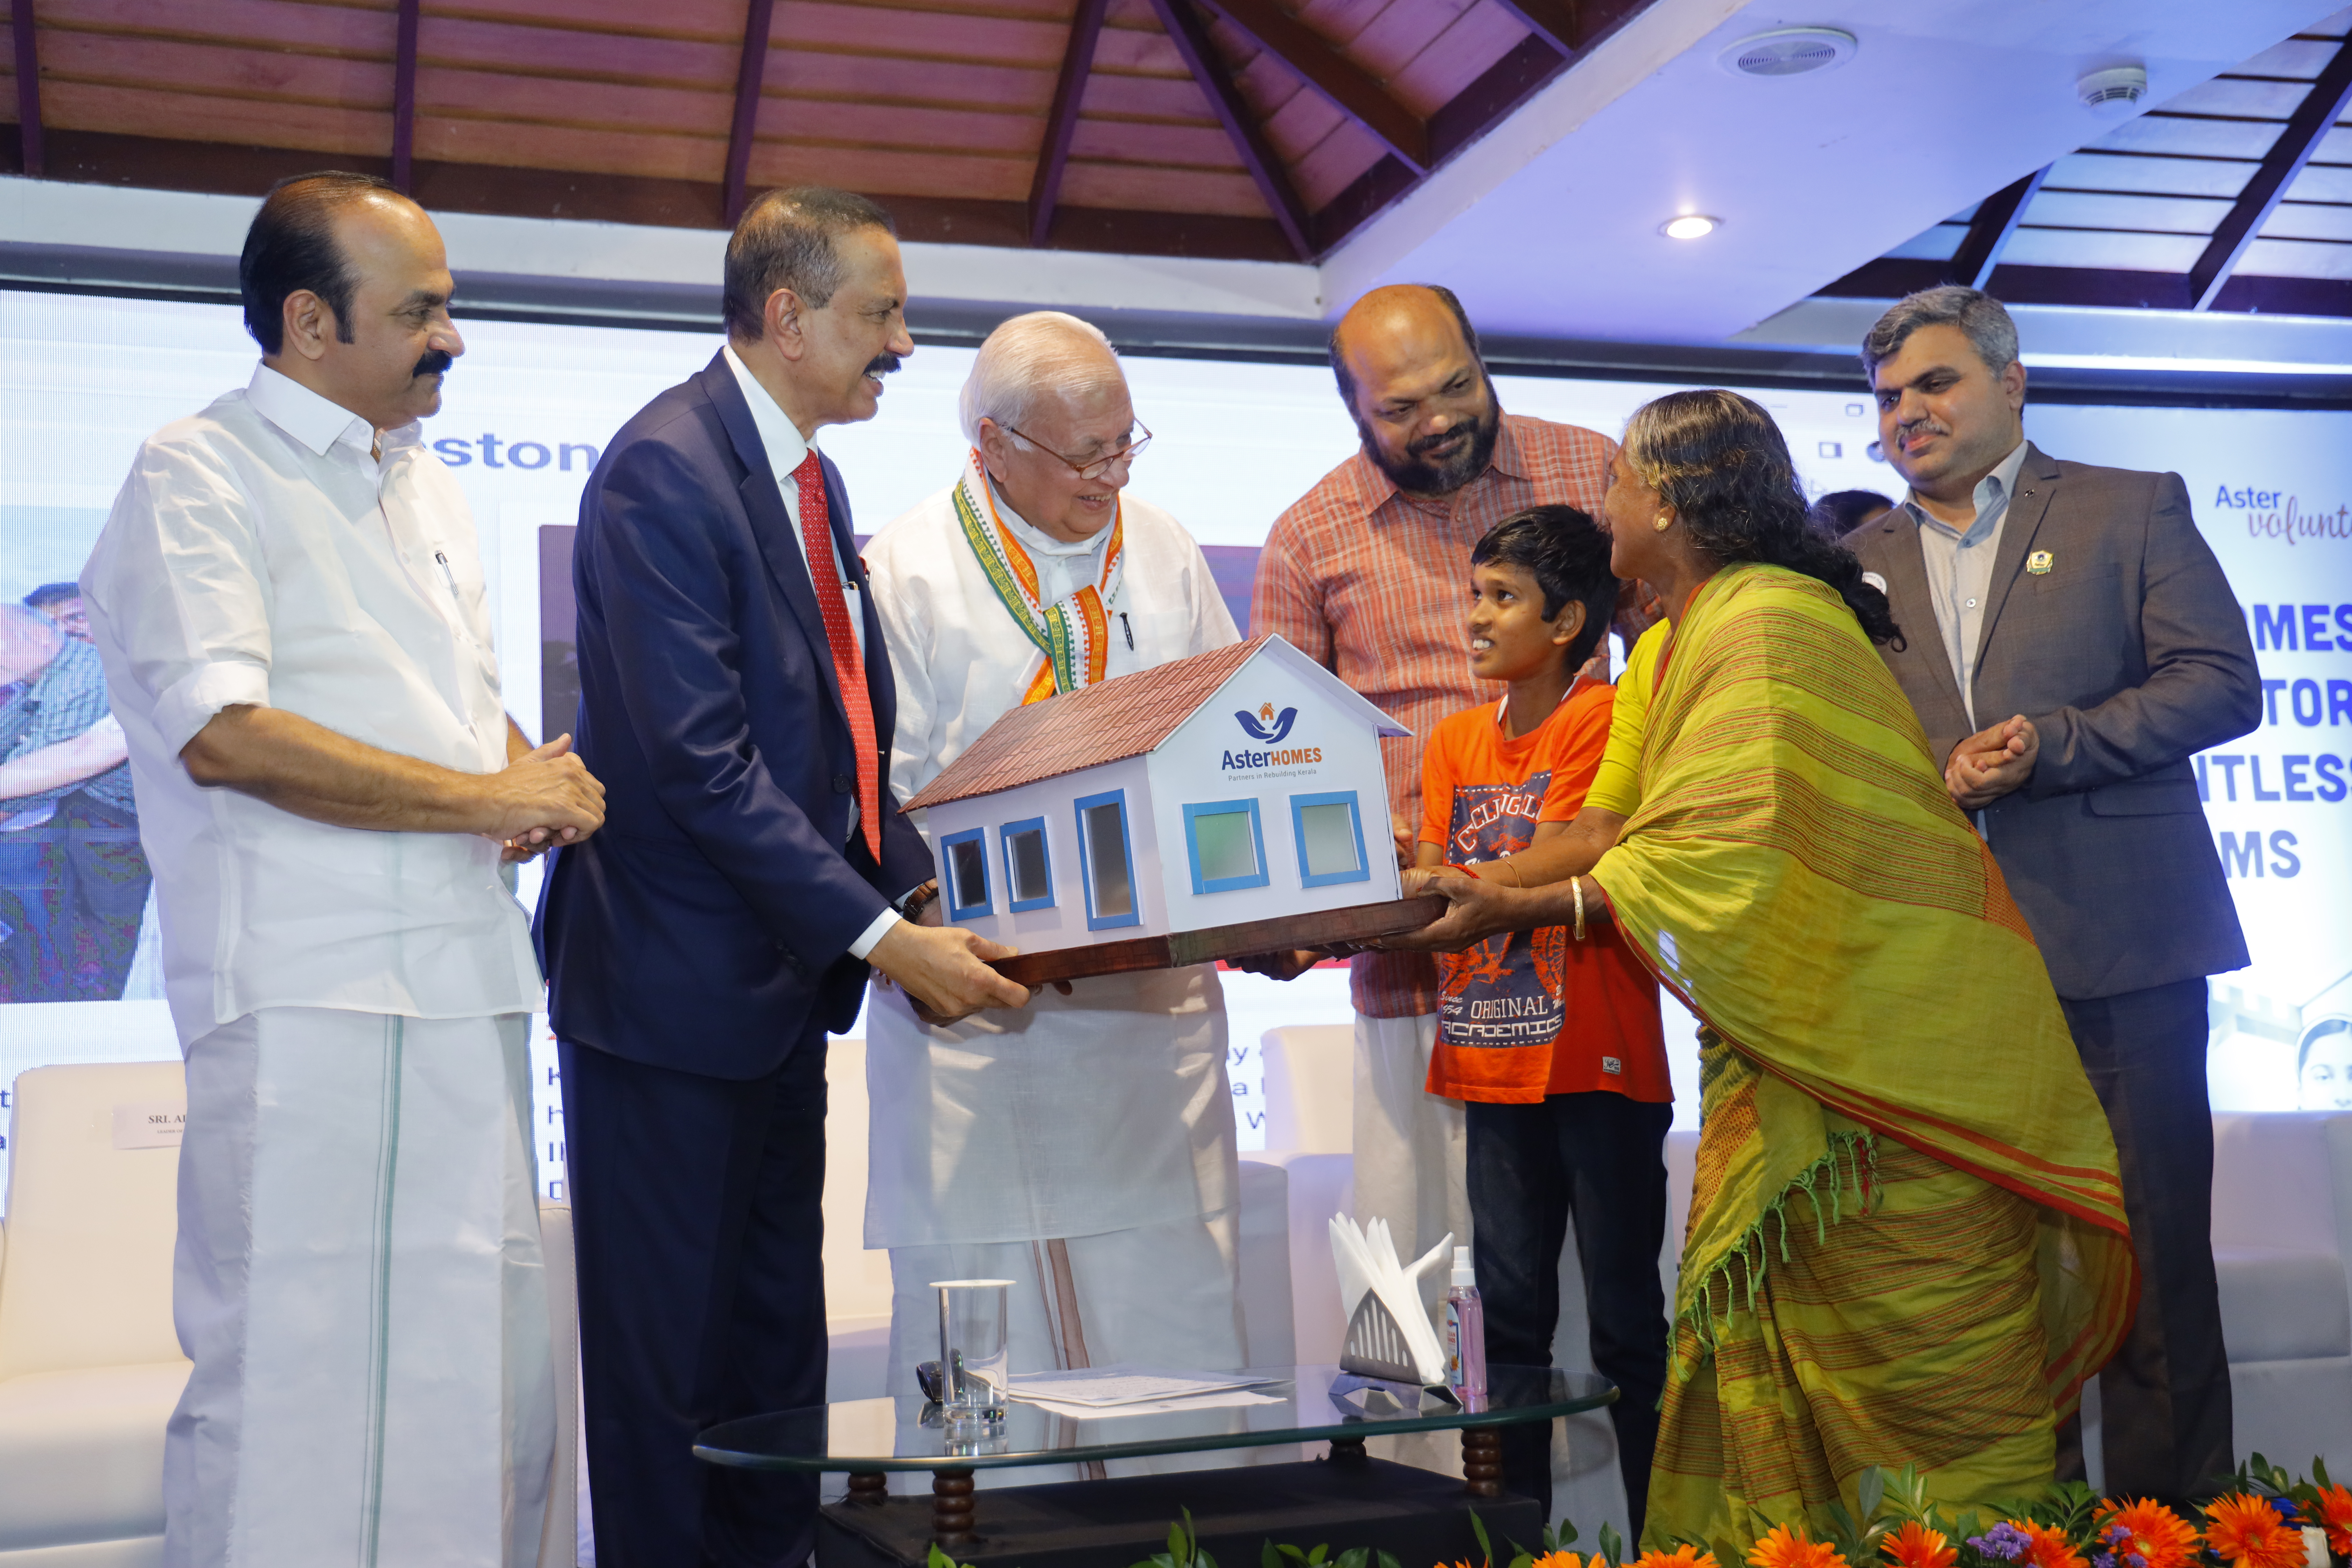 Aster delivers its commitment to build 255 Aster Homes for the flood victims of Kerala